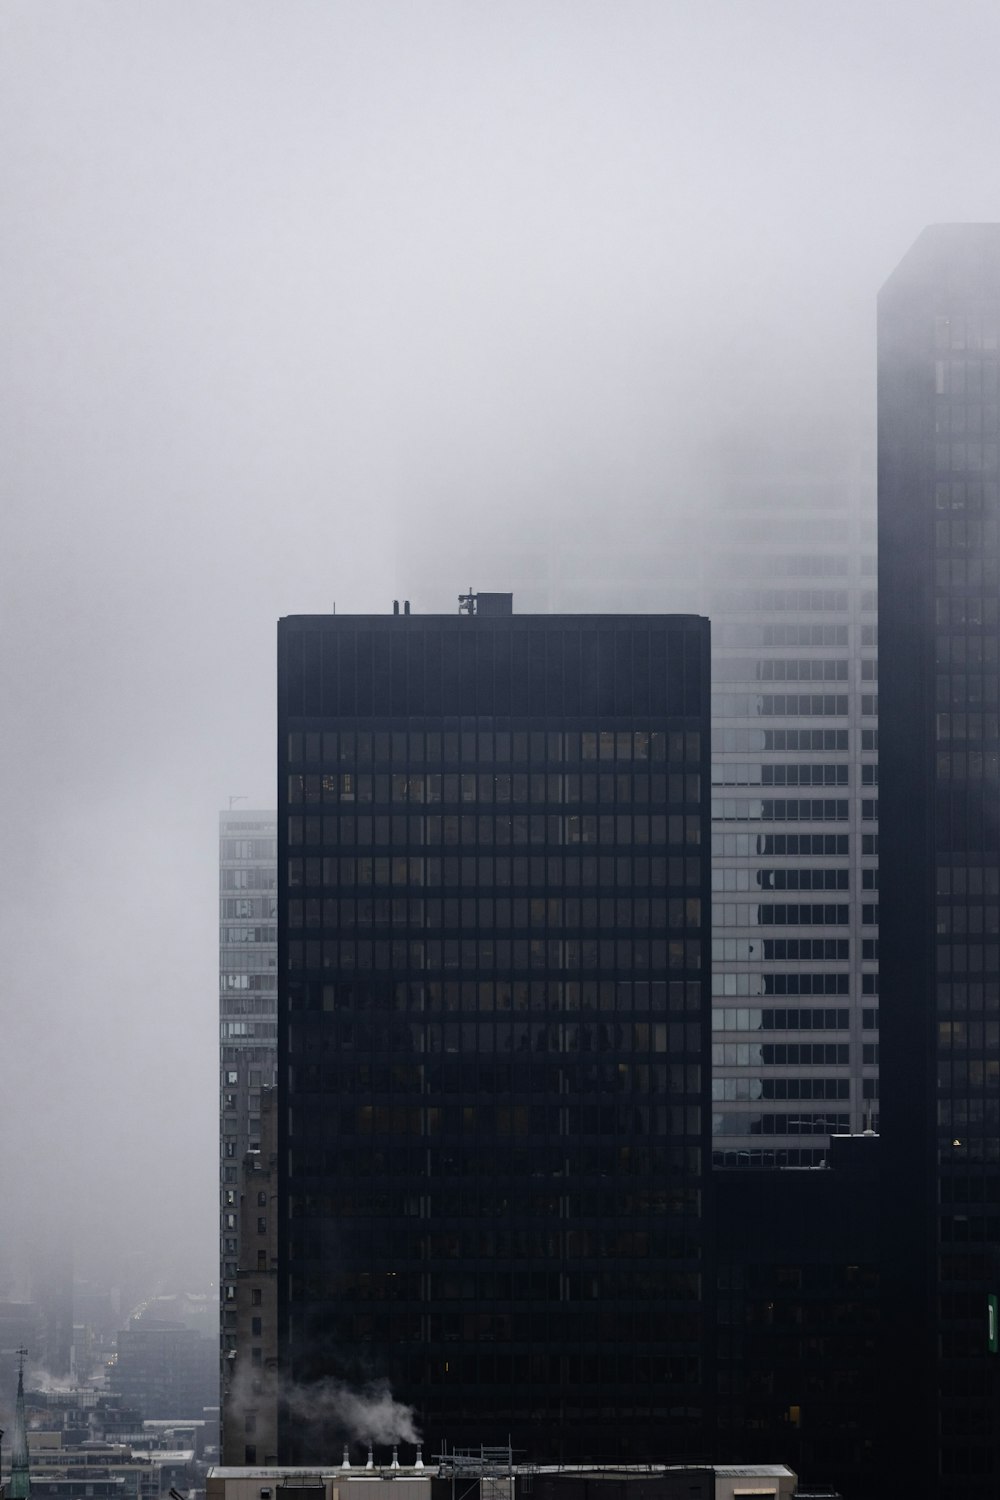 a view of a city with tall buildings on a foggy day